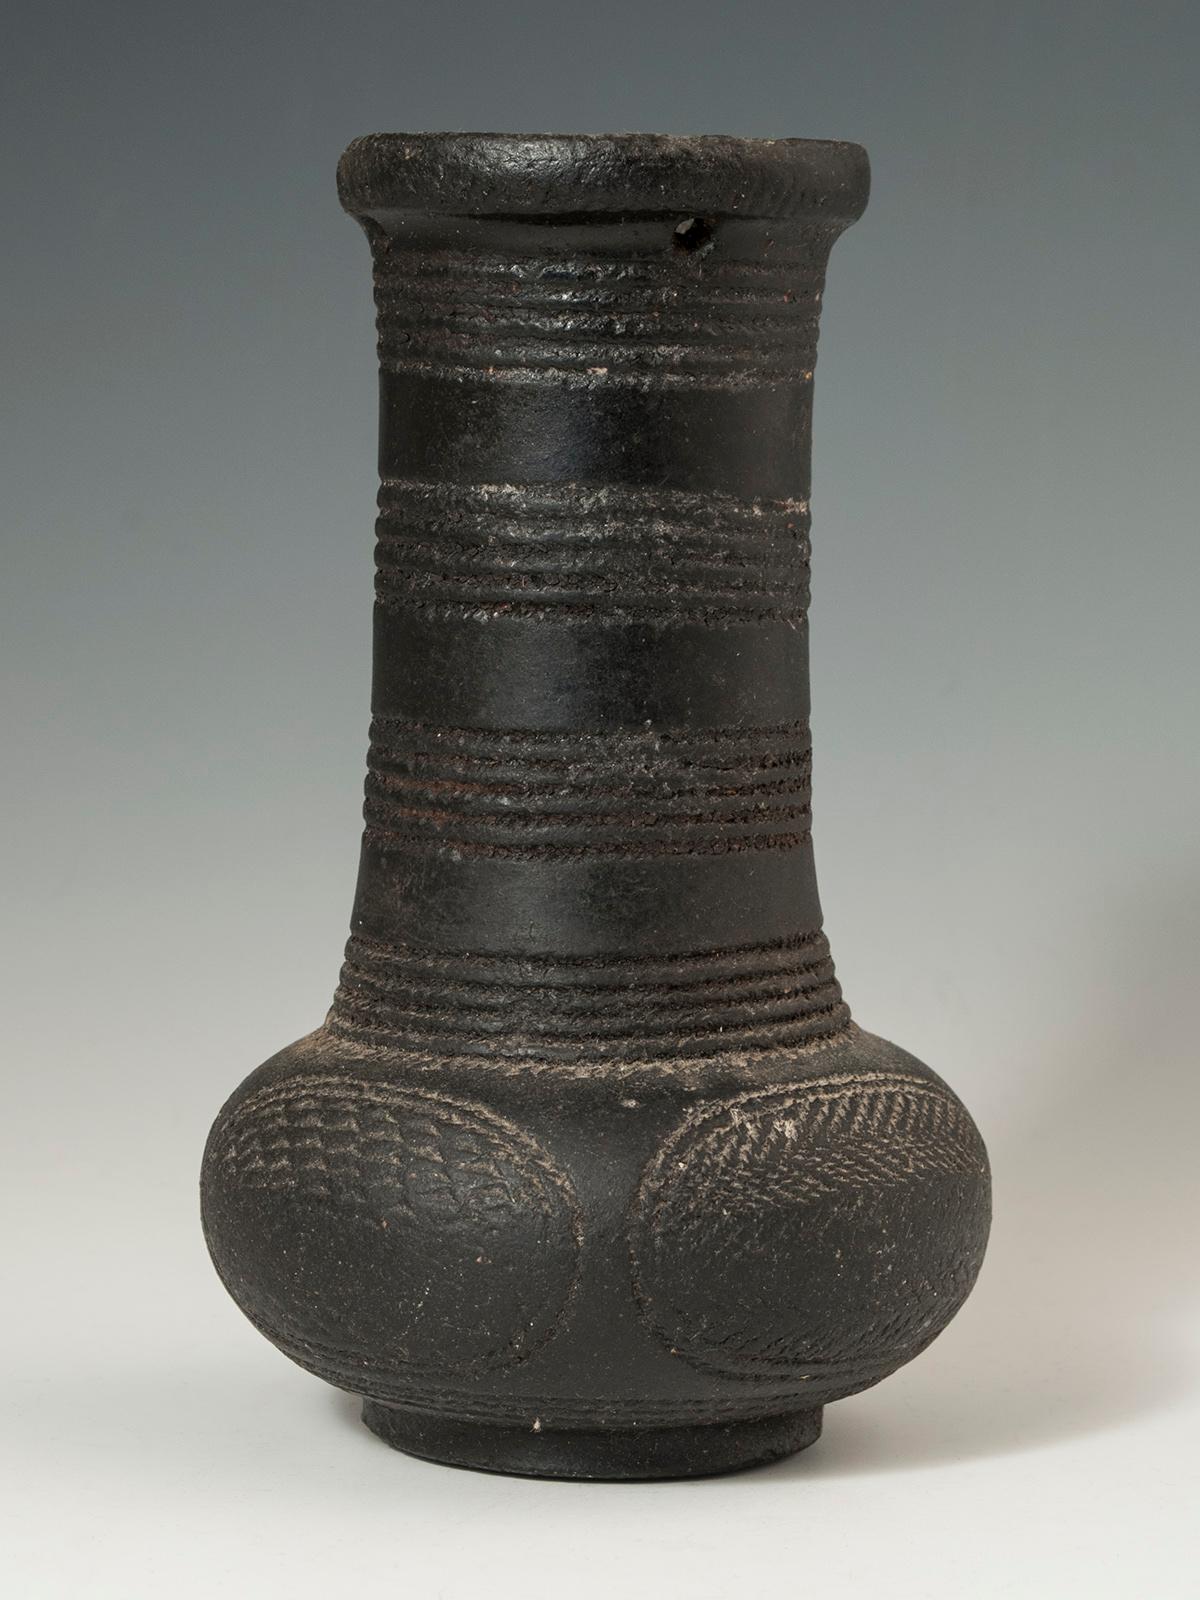 Early to mid-20th century tribal terracotta apothecary vessel, D.R. Congo

It is common for vessels from the Mangbetu to have figurative elements; much more unusual for them to be of geometric design. This one has incised bands on the neck and four